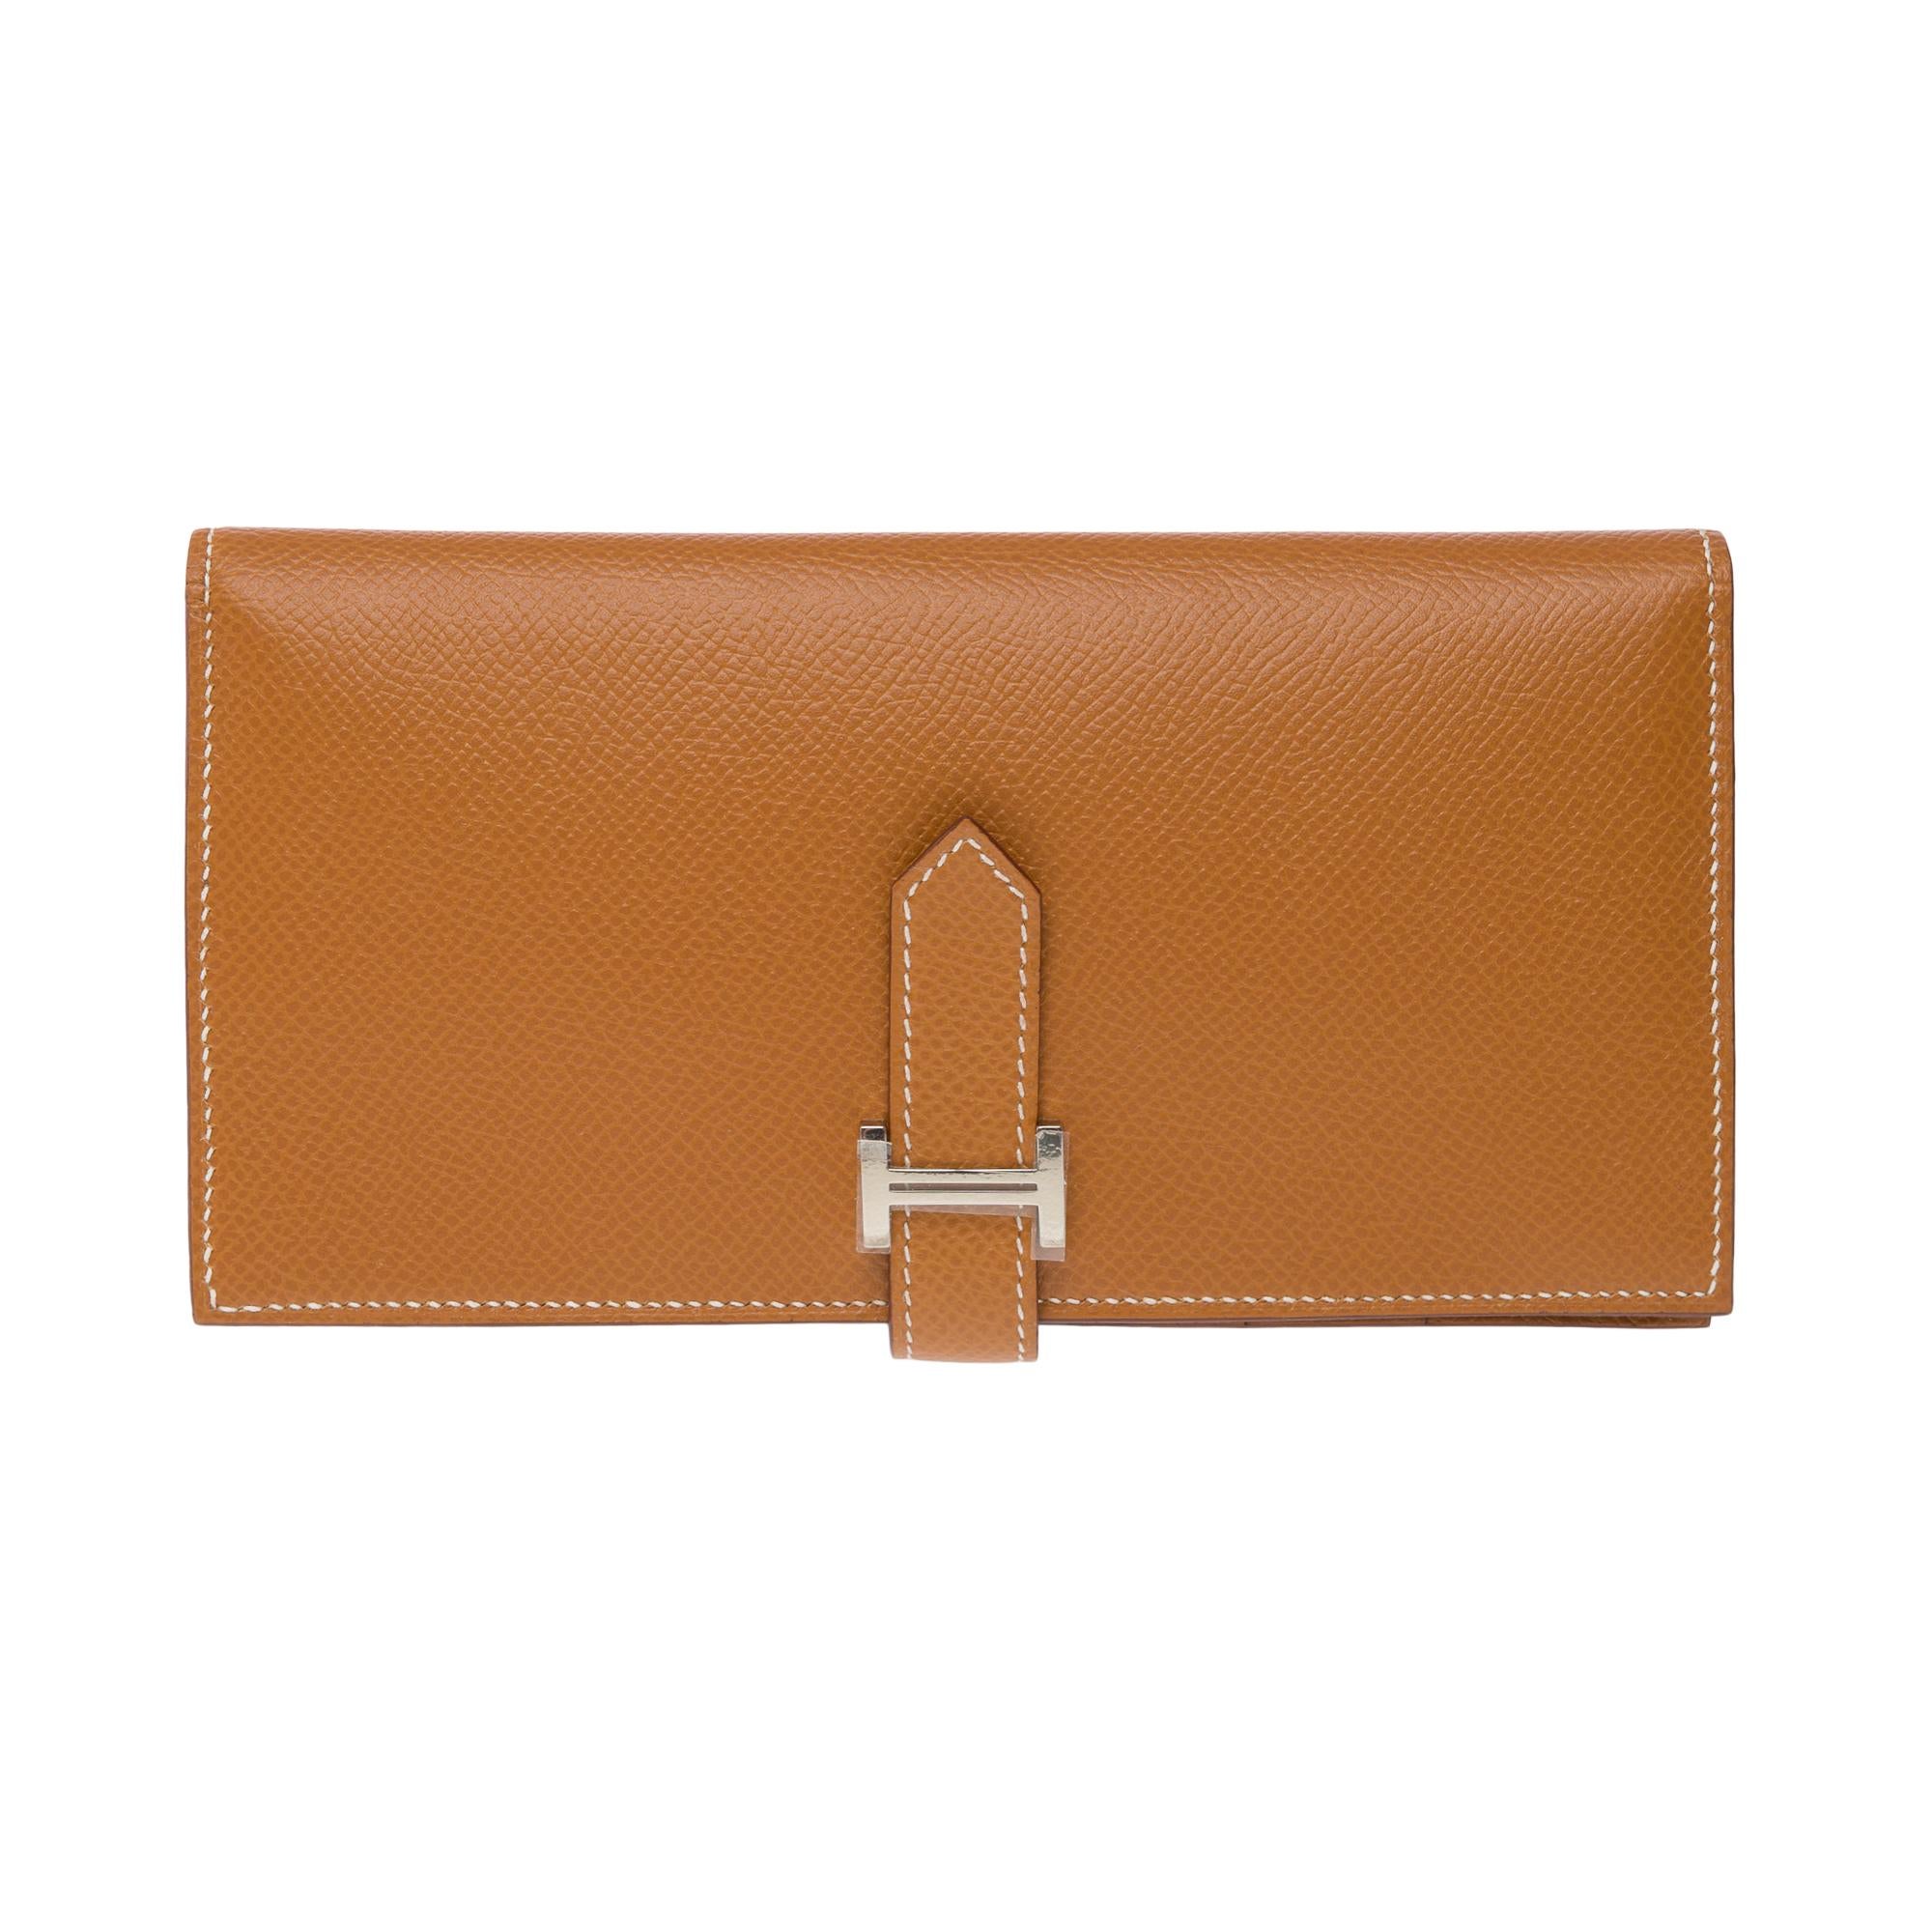 Lovely​ ​Hermès​ ​Béarn​ ​wallet​ ​in​ ​epsom​ ​gold​ ​leather,​ ​palladium​ ​silver​ ​metal​ ​trim​ ​for​ ​a​ ​hand​ ​carry

A​ ​tab​ ​closure​ ​and​ ​H​ ​closure​ ​in​ ​silver​ ​palladium​ ​metal​ ​
Interior​ ​lining​ ​in​ ​epsom​ ​gold​